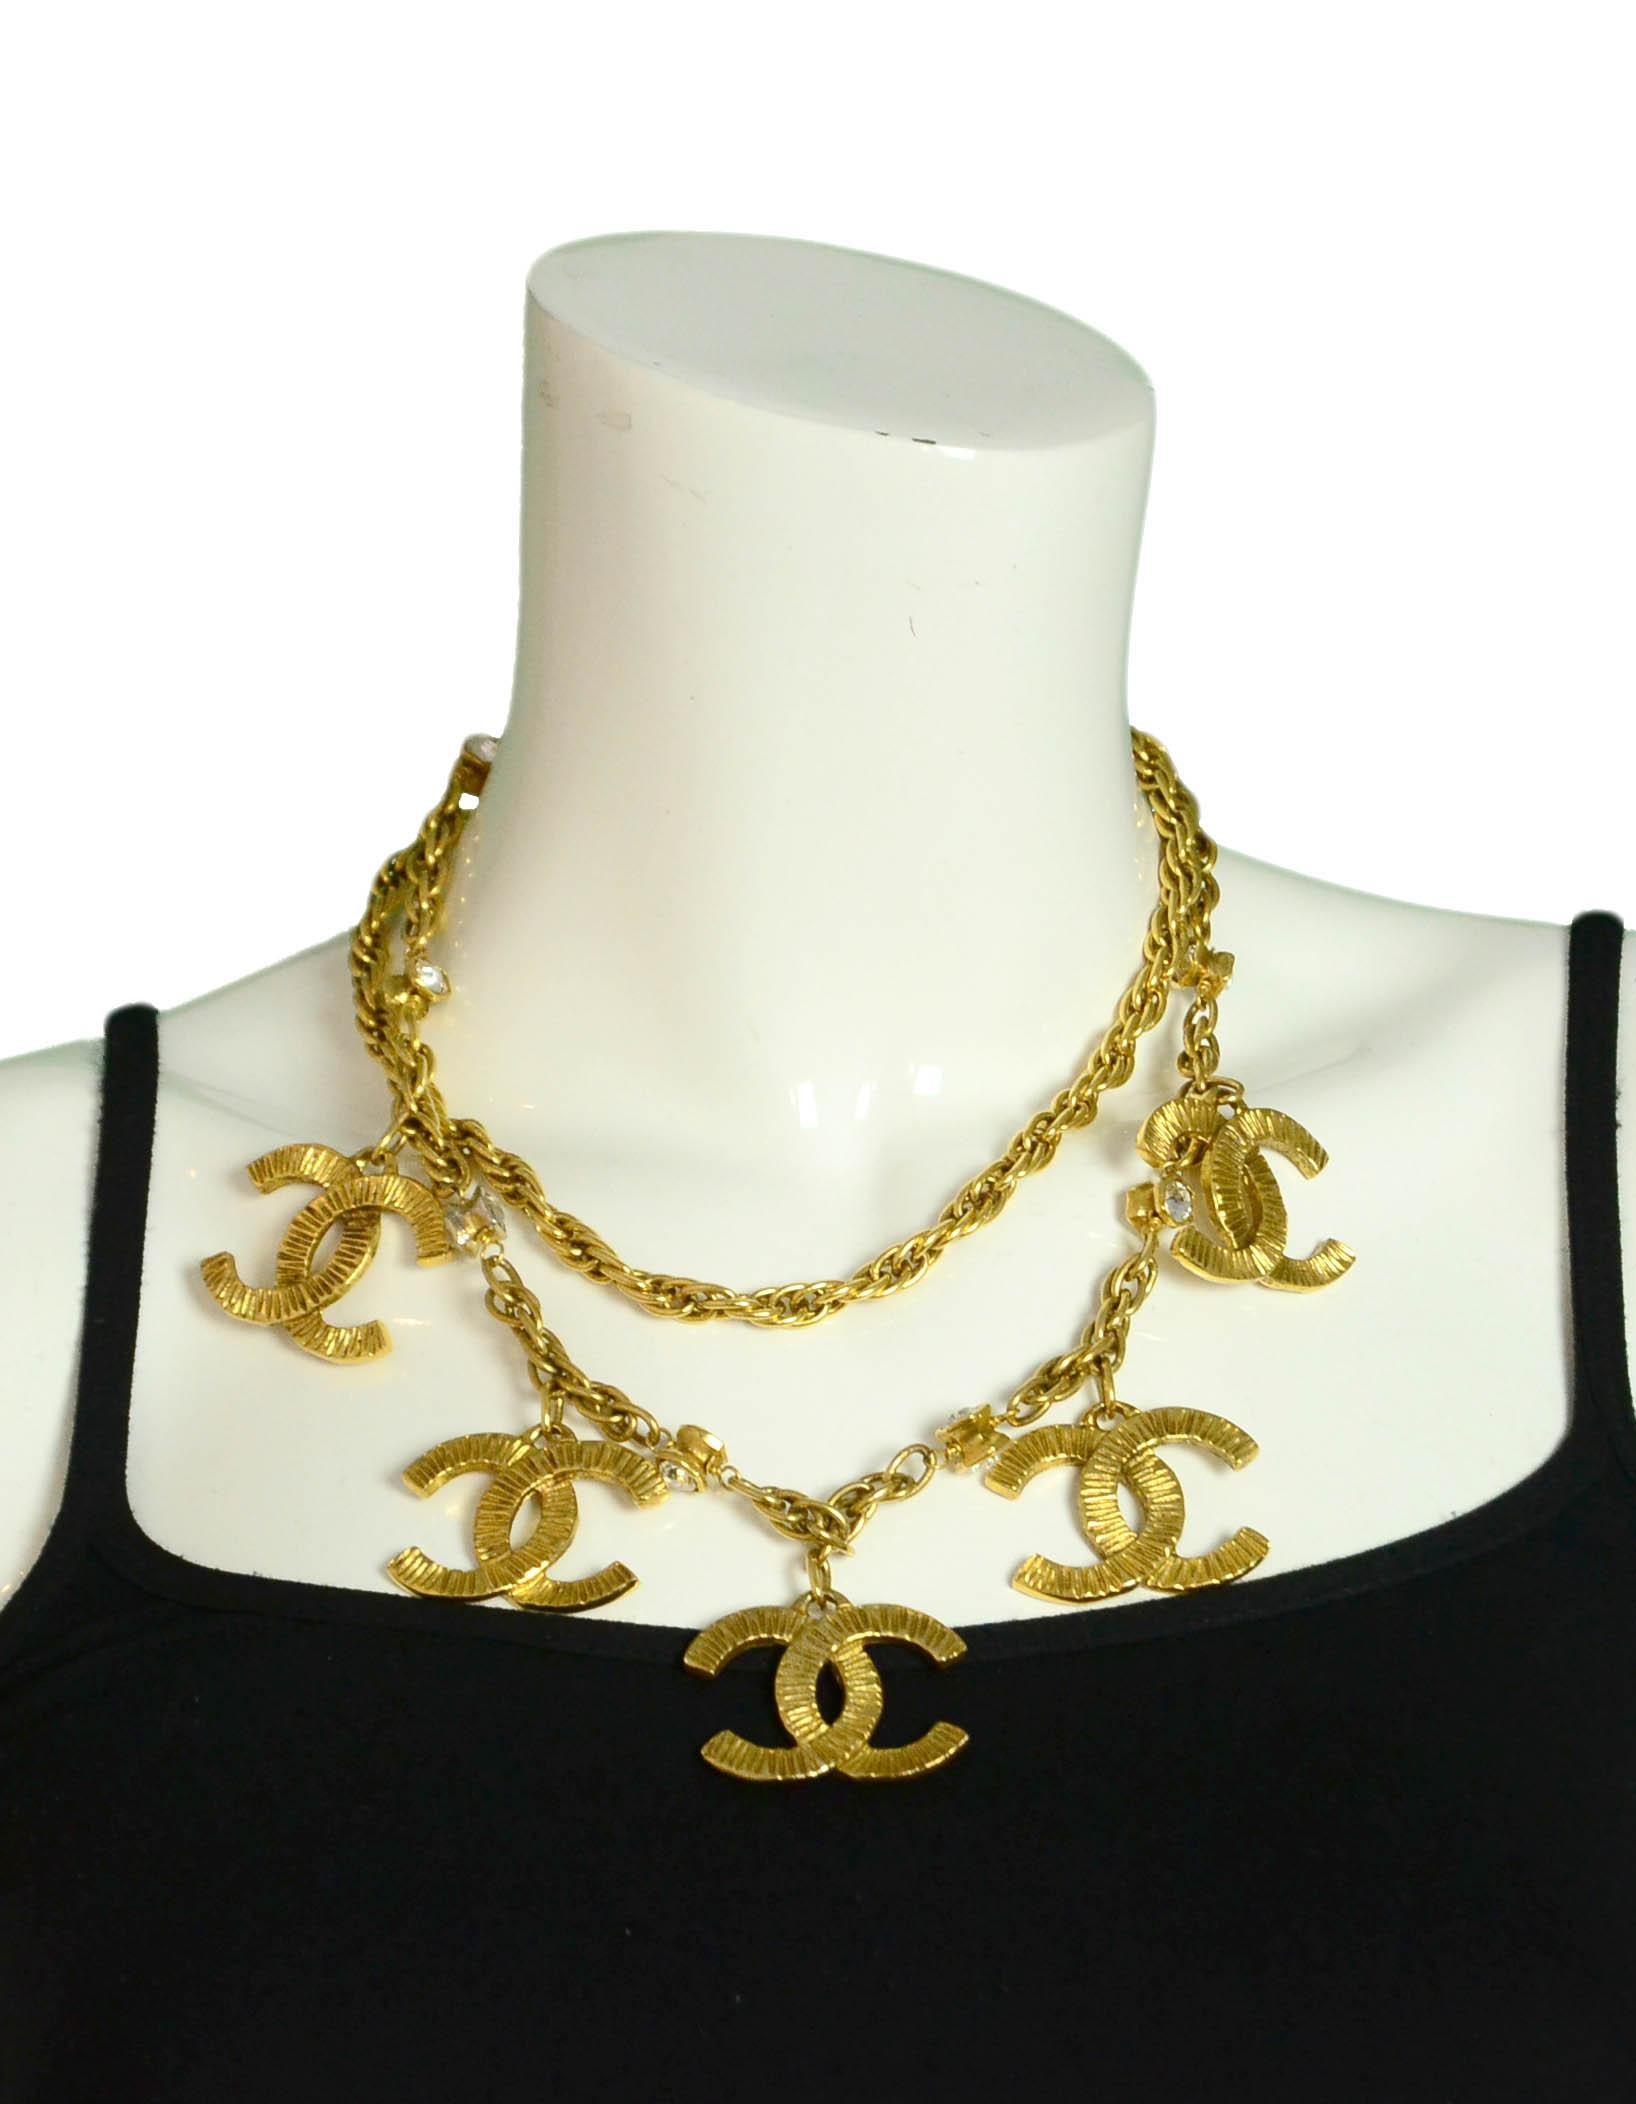 Chanel Vintage Goldtone CC Charm Necklace.Features two goldtone chainlink strands. One of the strands has crystals accents with five textured hanging CC pendants.
Made In: France
Year of Production: Late '80s/early '90s
Color: Goldtone
Materials: